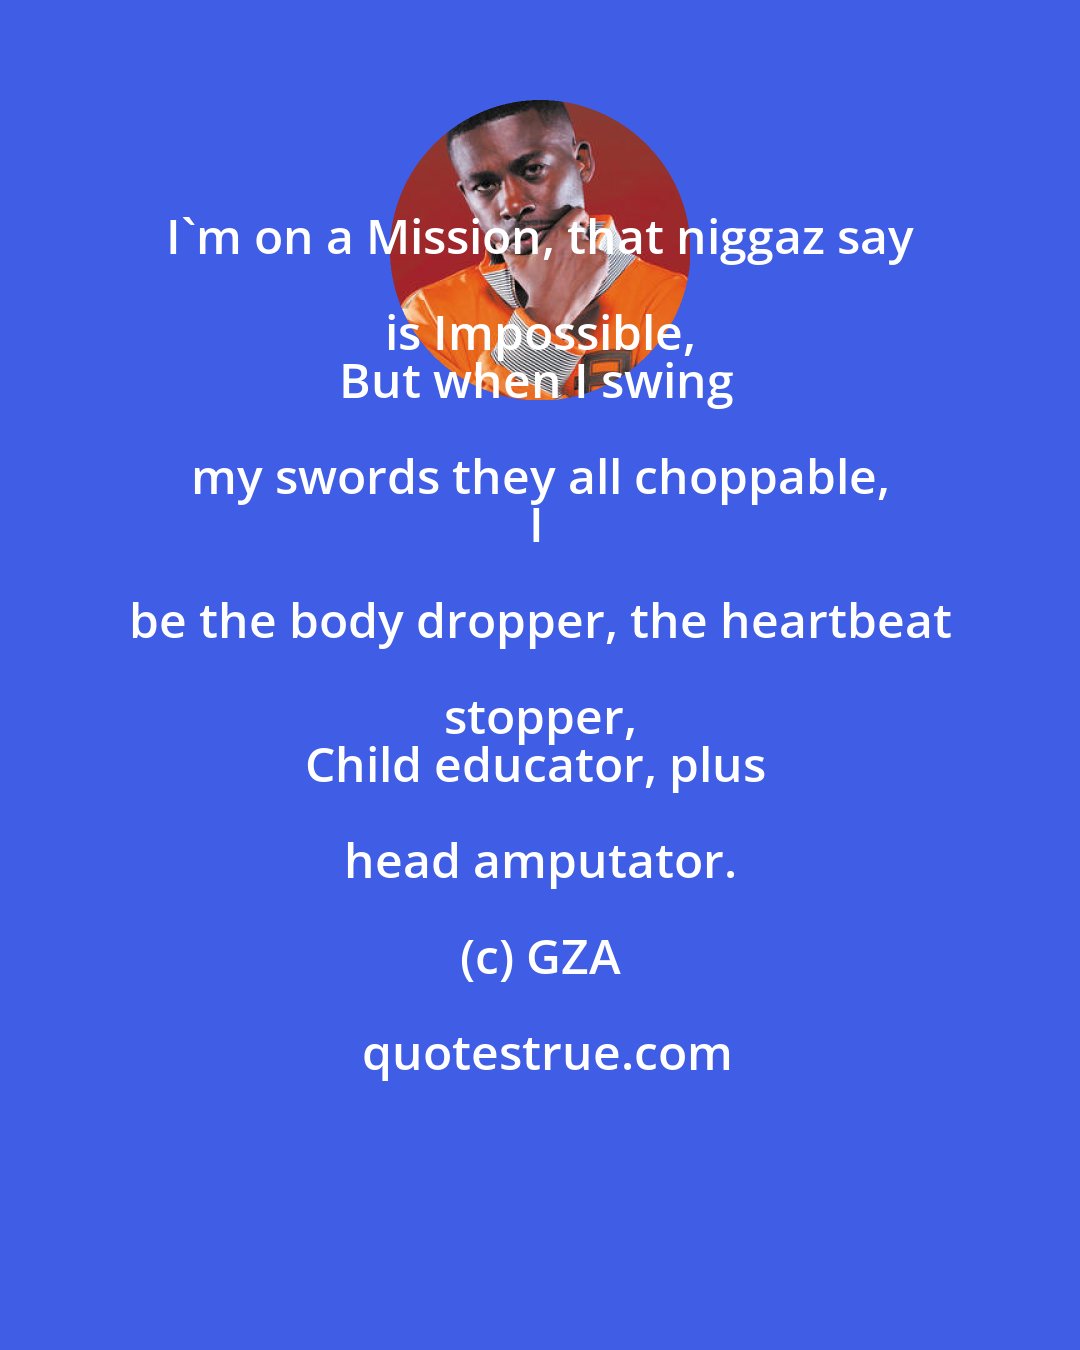 GZA: I'm on a Mission, that niggaz say is Impossible, 
But when I swing my swords they all choppable, 
I be the body dropper, the heartbeat stopper, 
Child educator, plus head amputator.